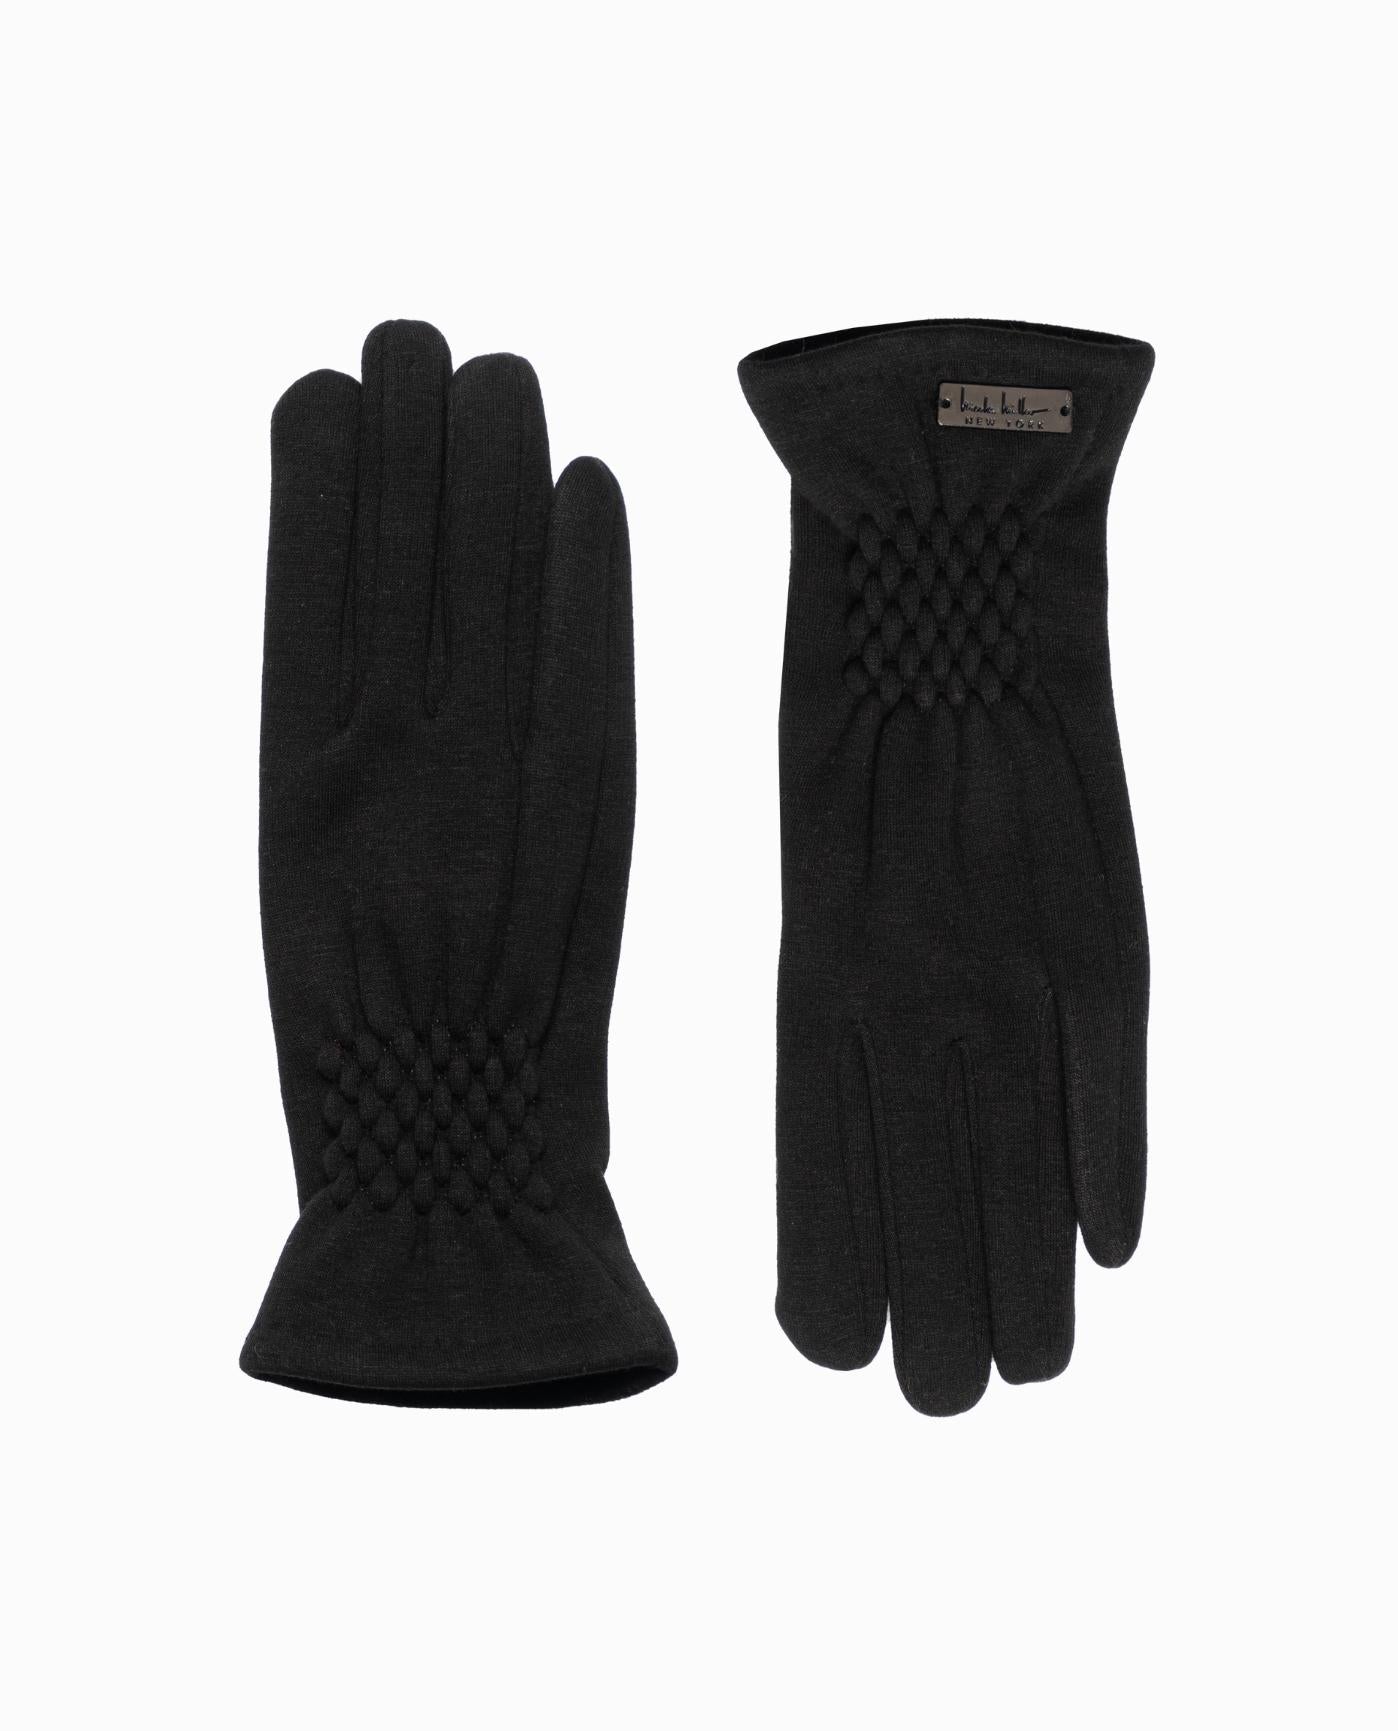 TOP OF QUILTED STRETCH GLOVE | Black